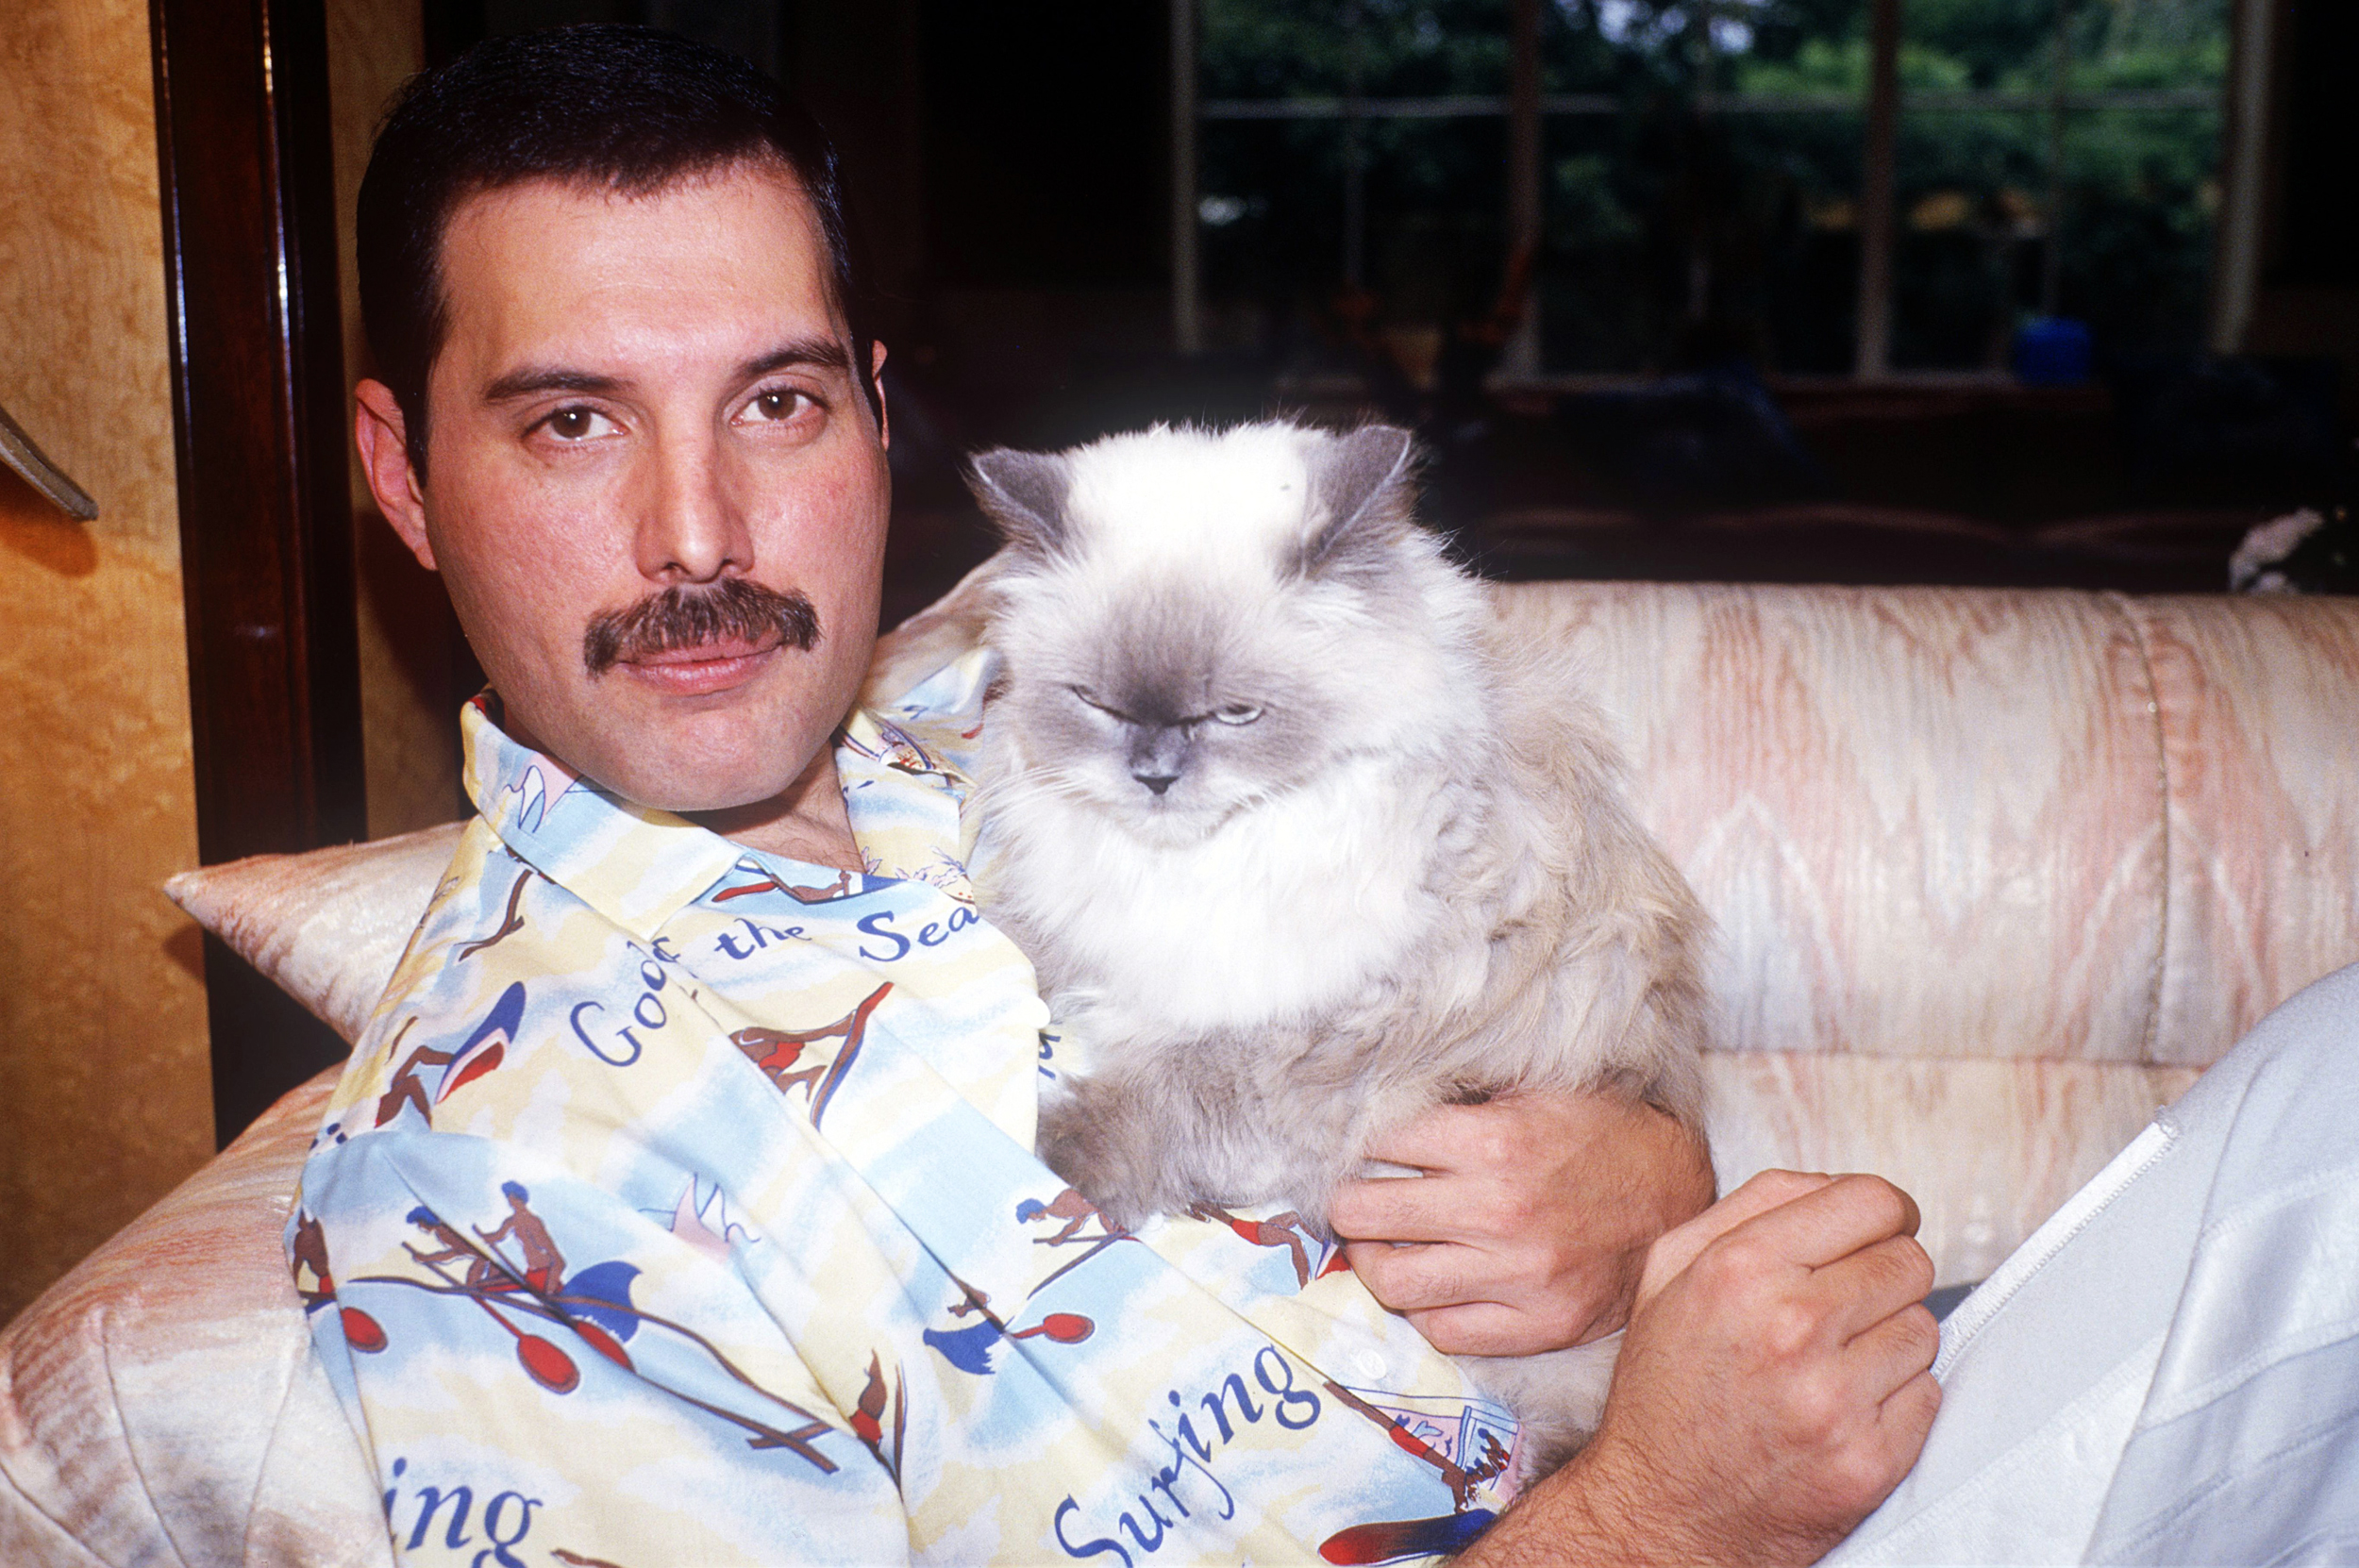 What 1980s Stereotype Are You? Freddie Mercury with cat